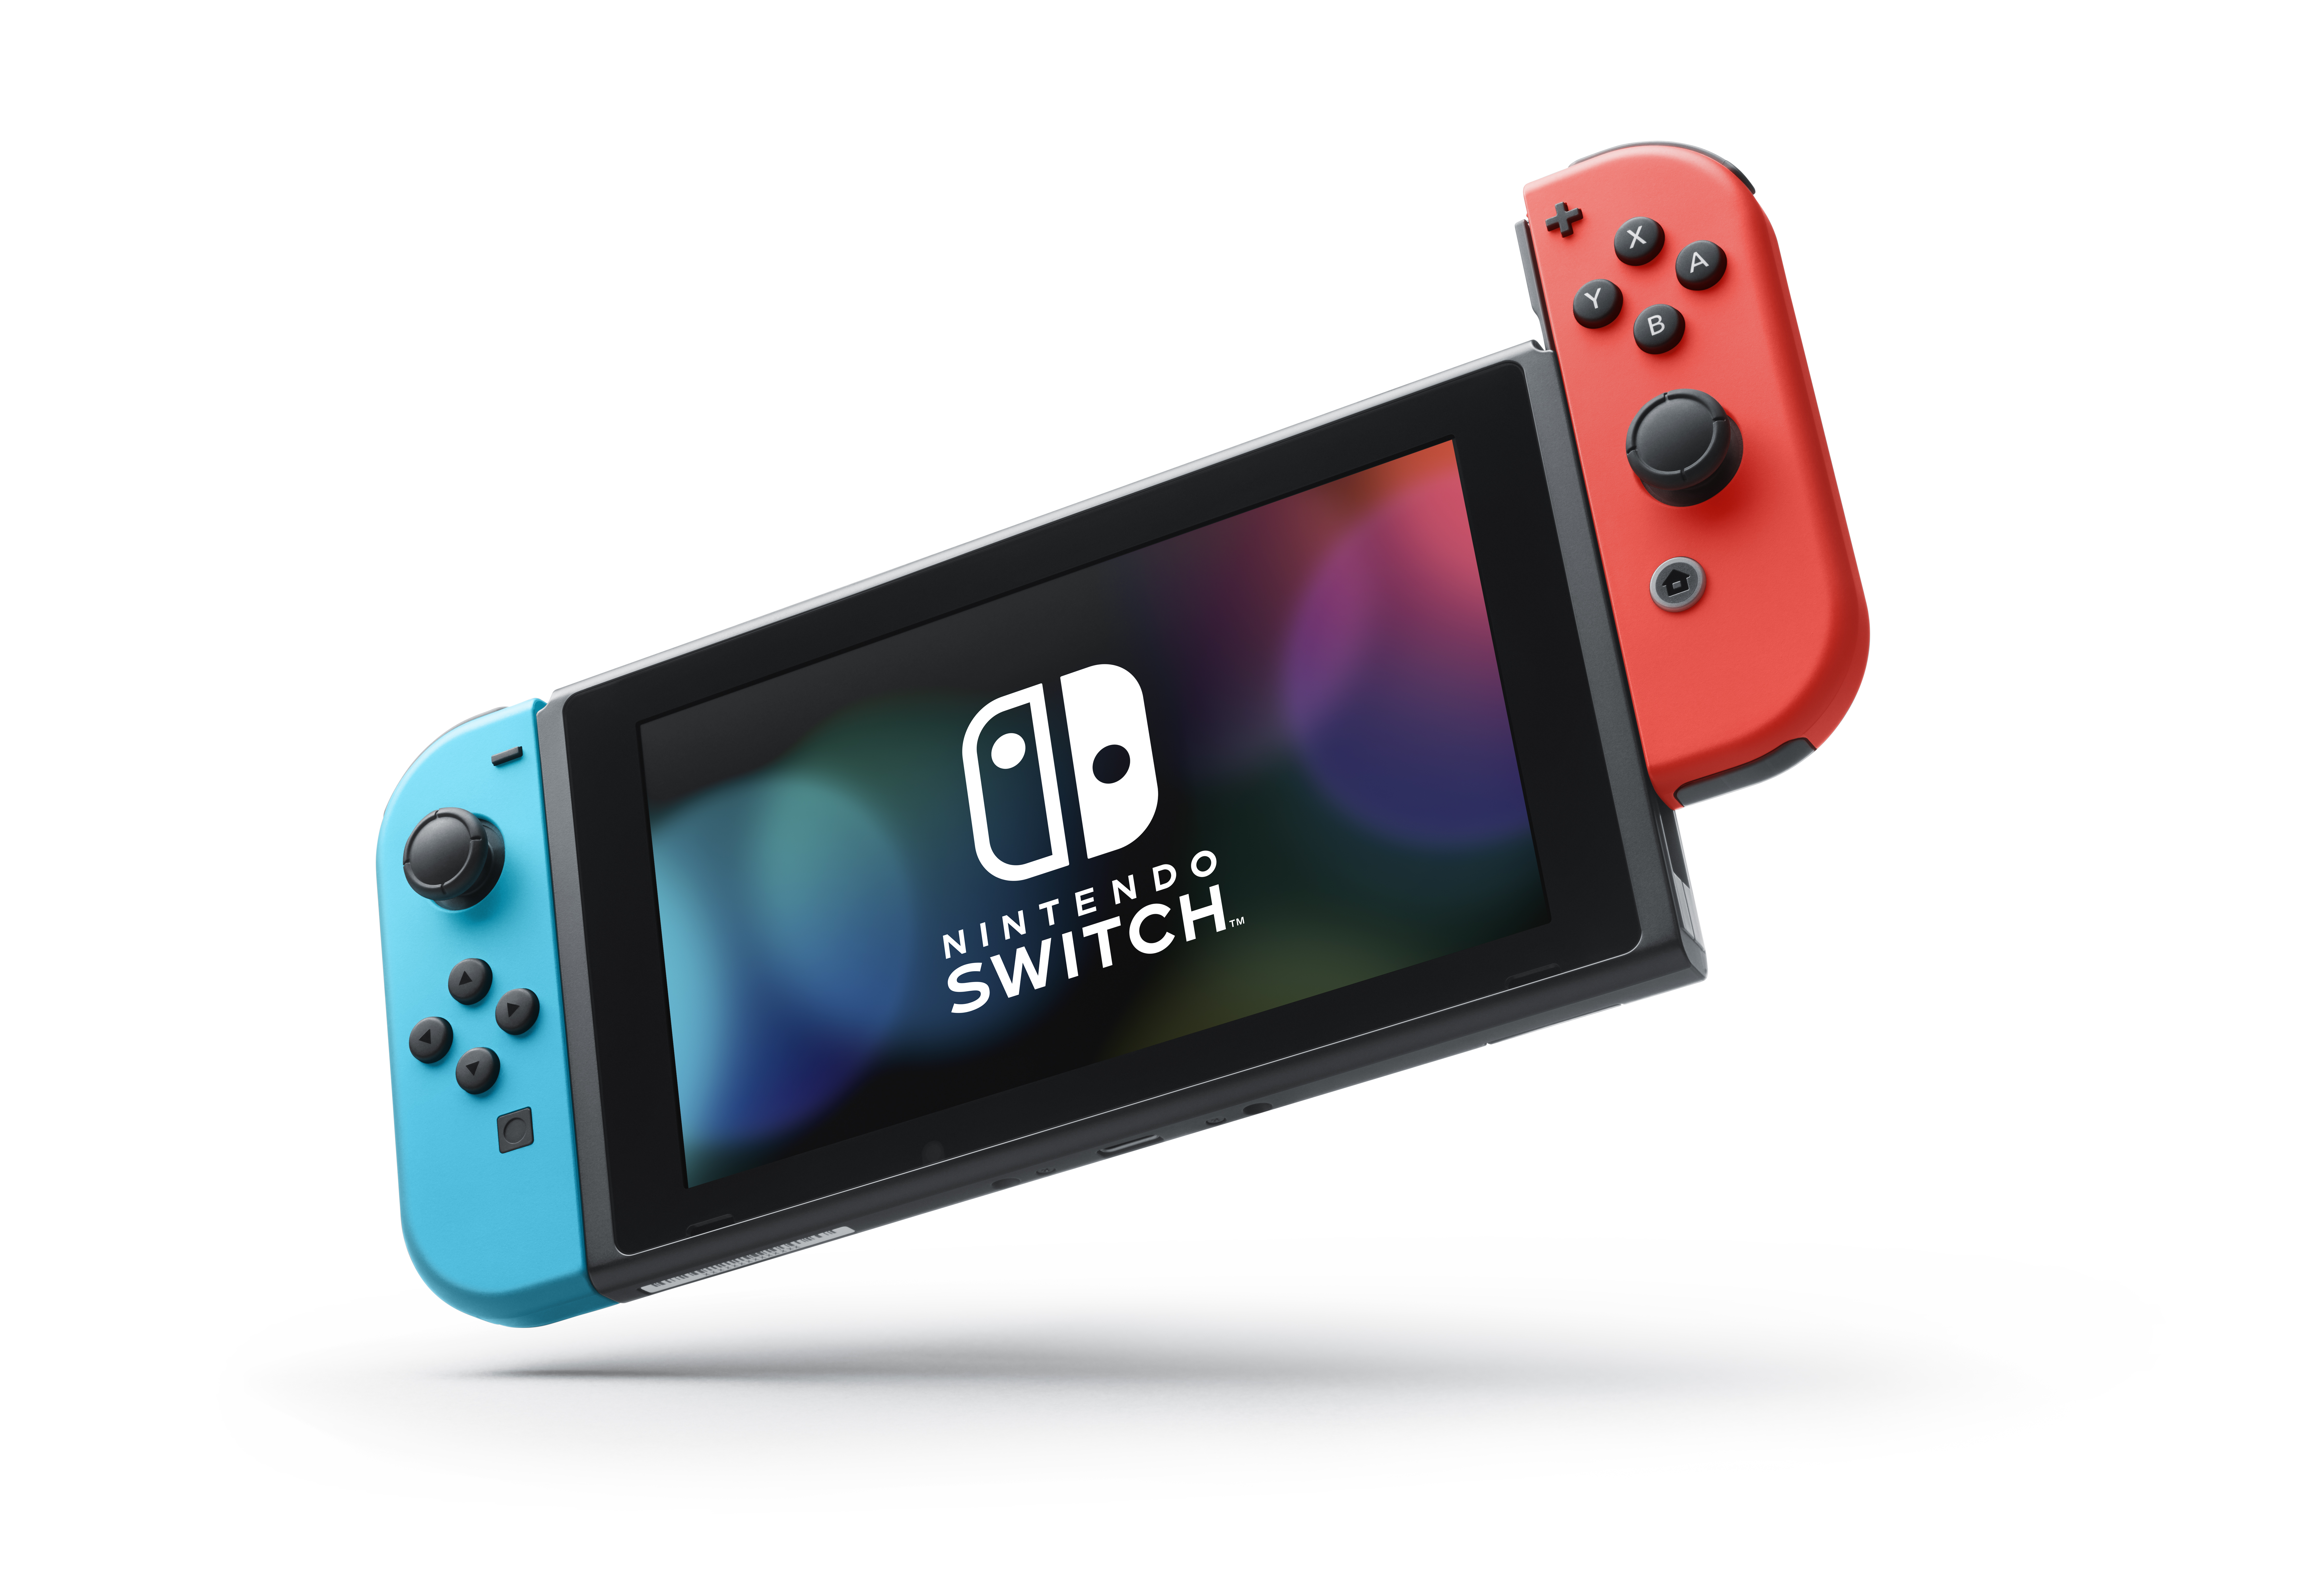 where's the best place to buy a nintendo switch